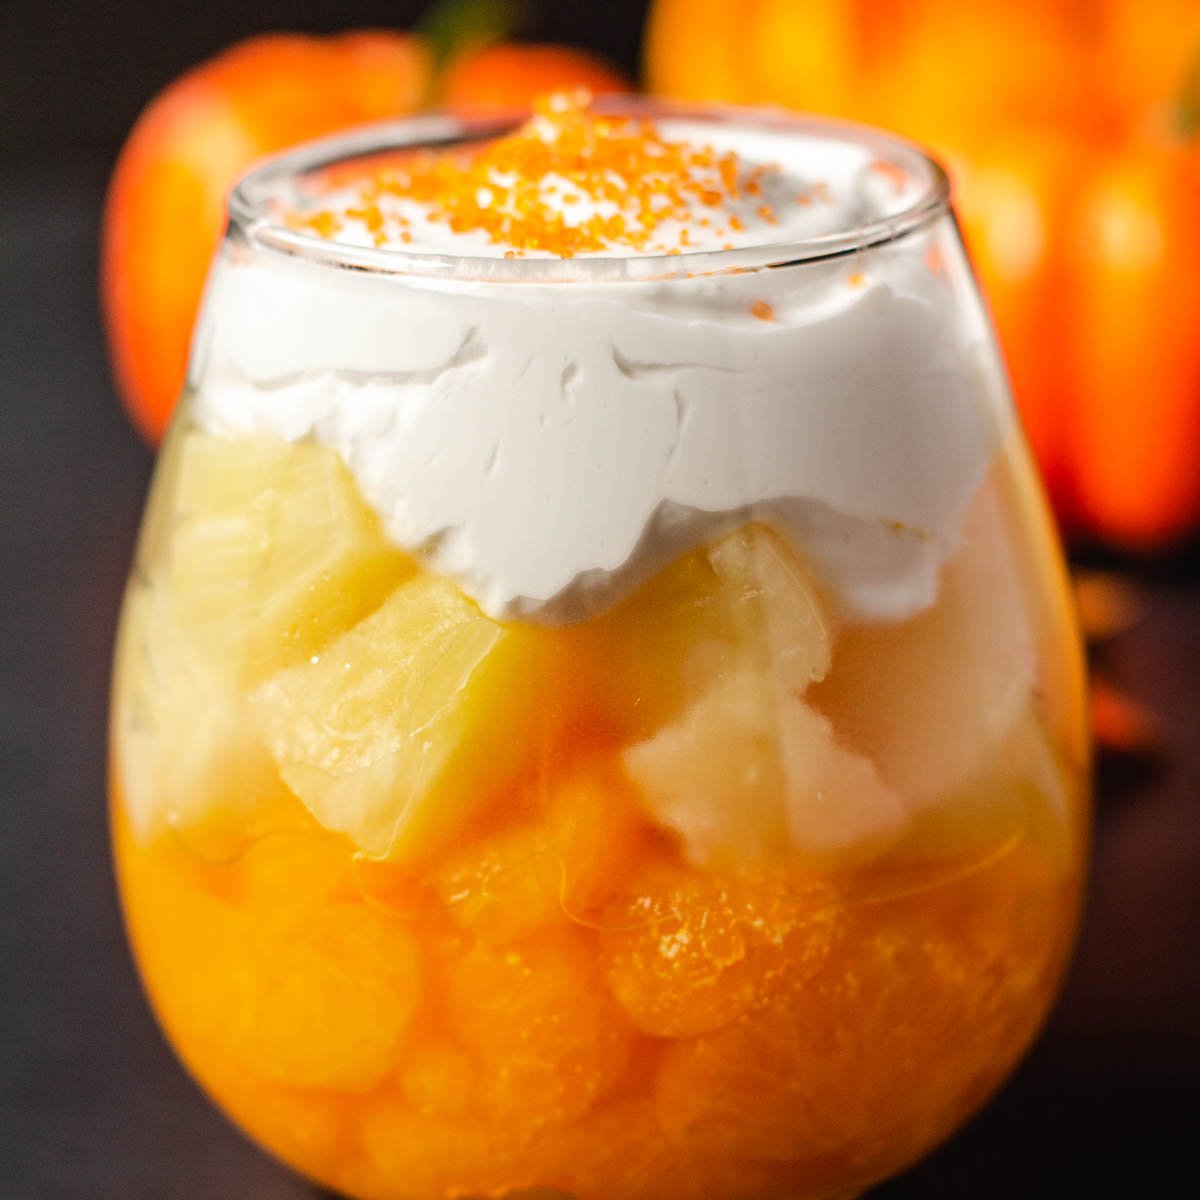 candy corn fruit parfait with mandarin oranges, pineapple, and whipped cream